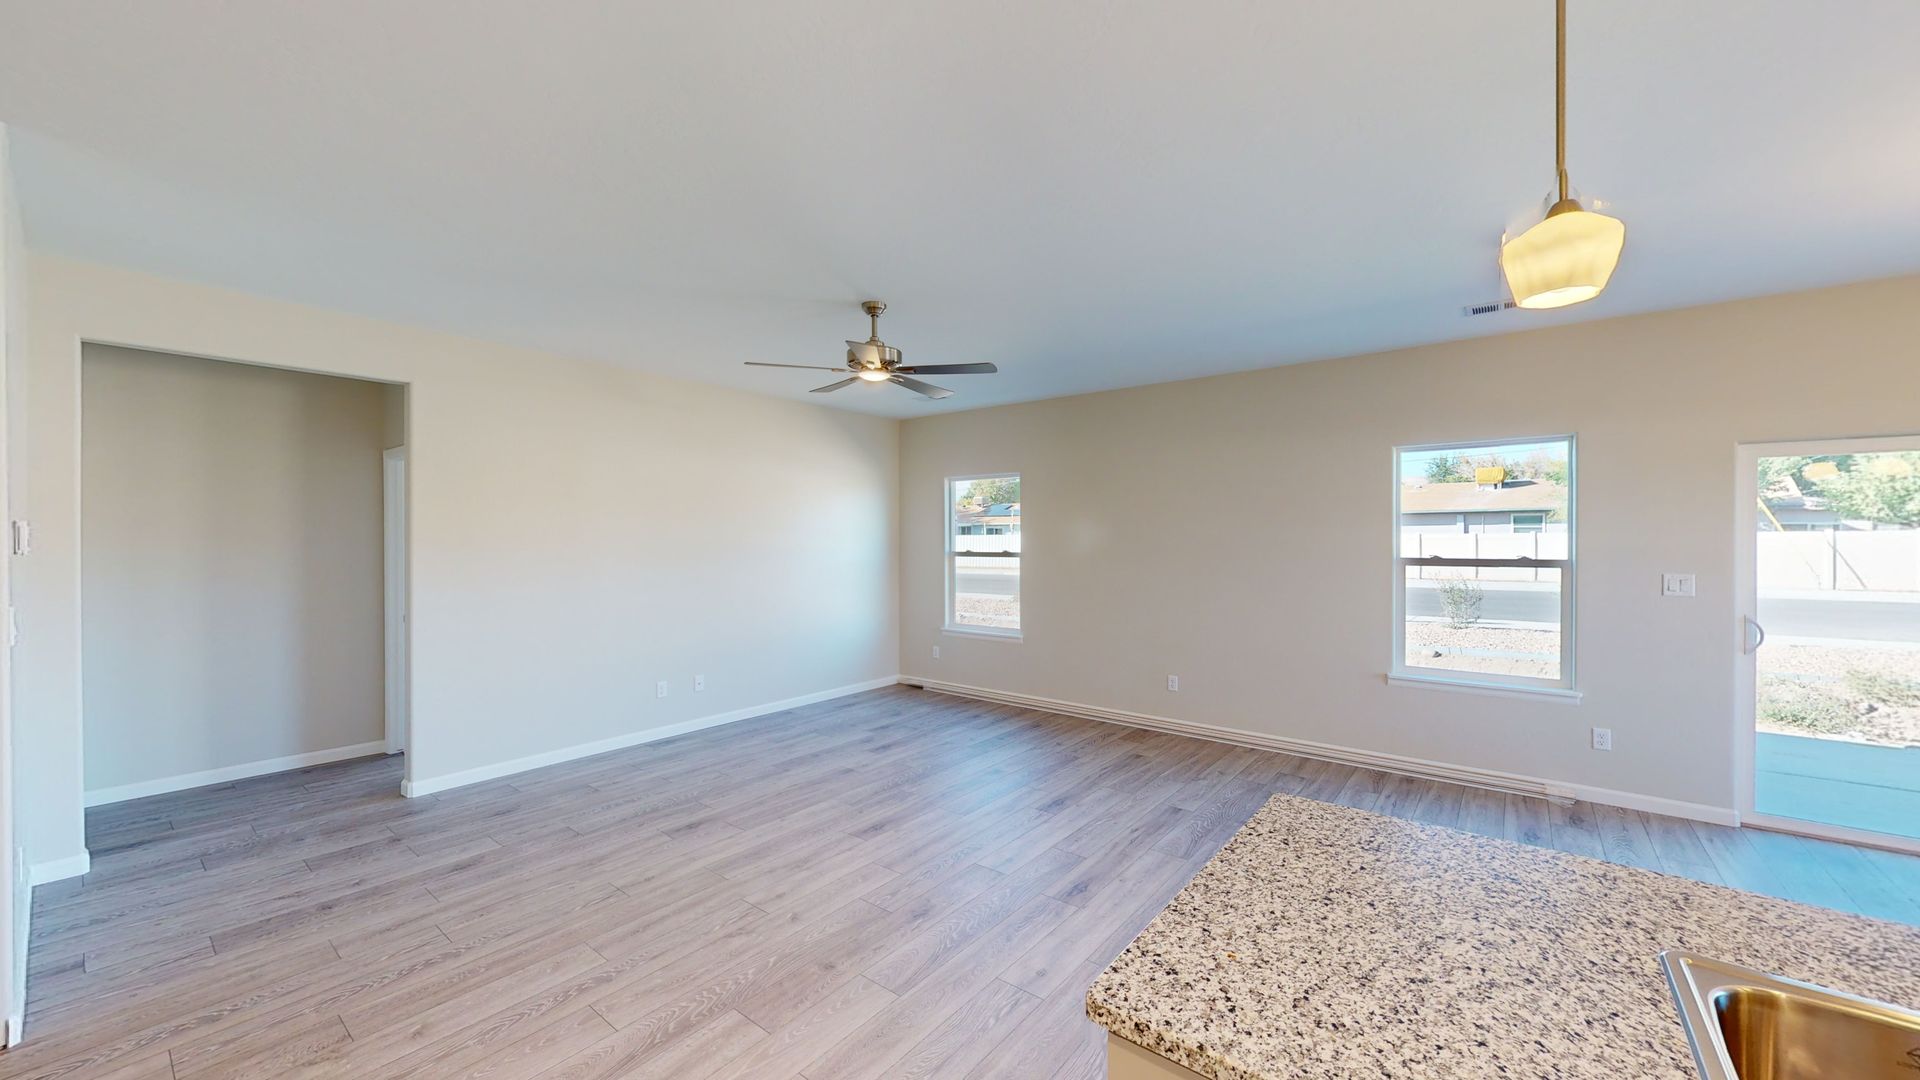 Great room with ceiling fan and granite kitchen counter